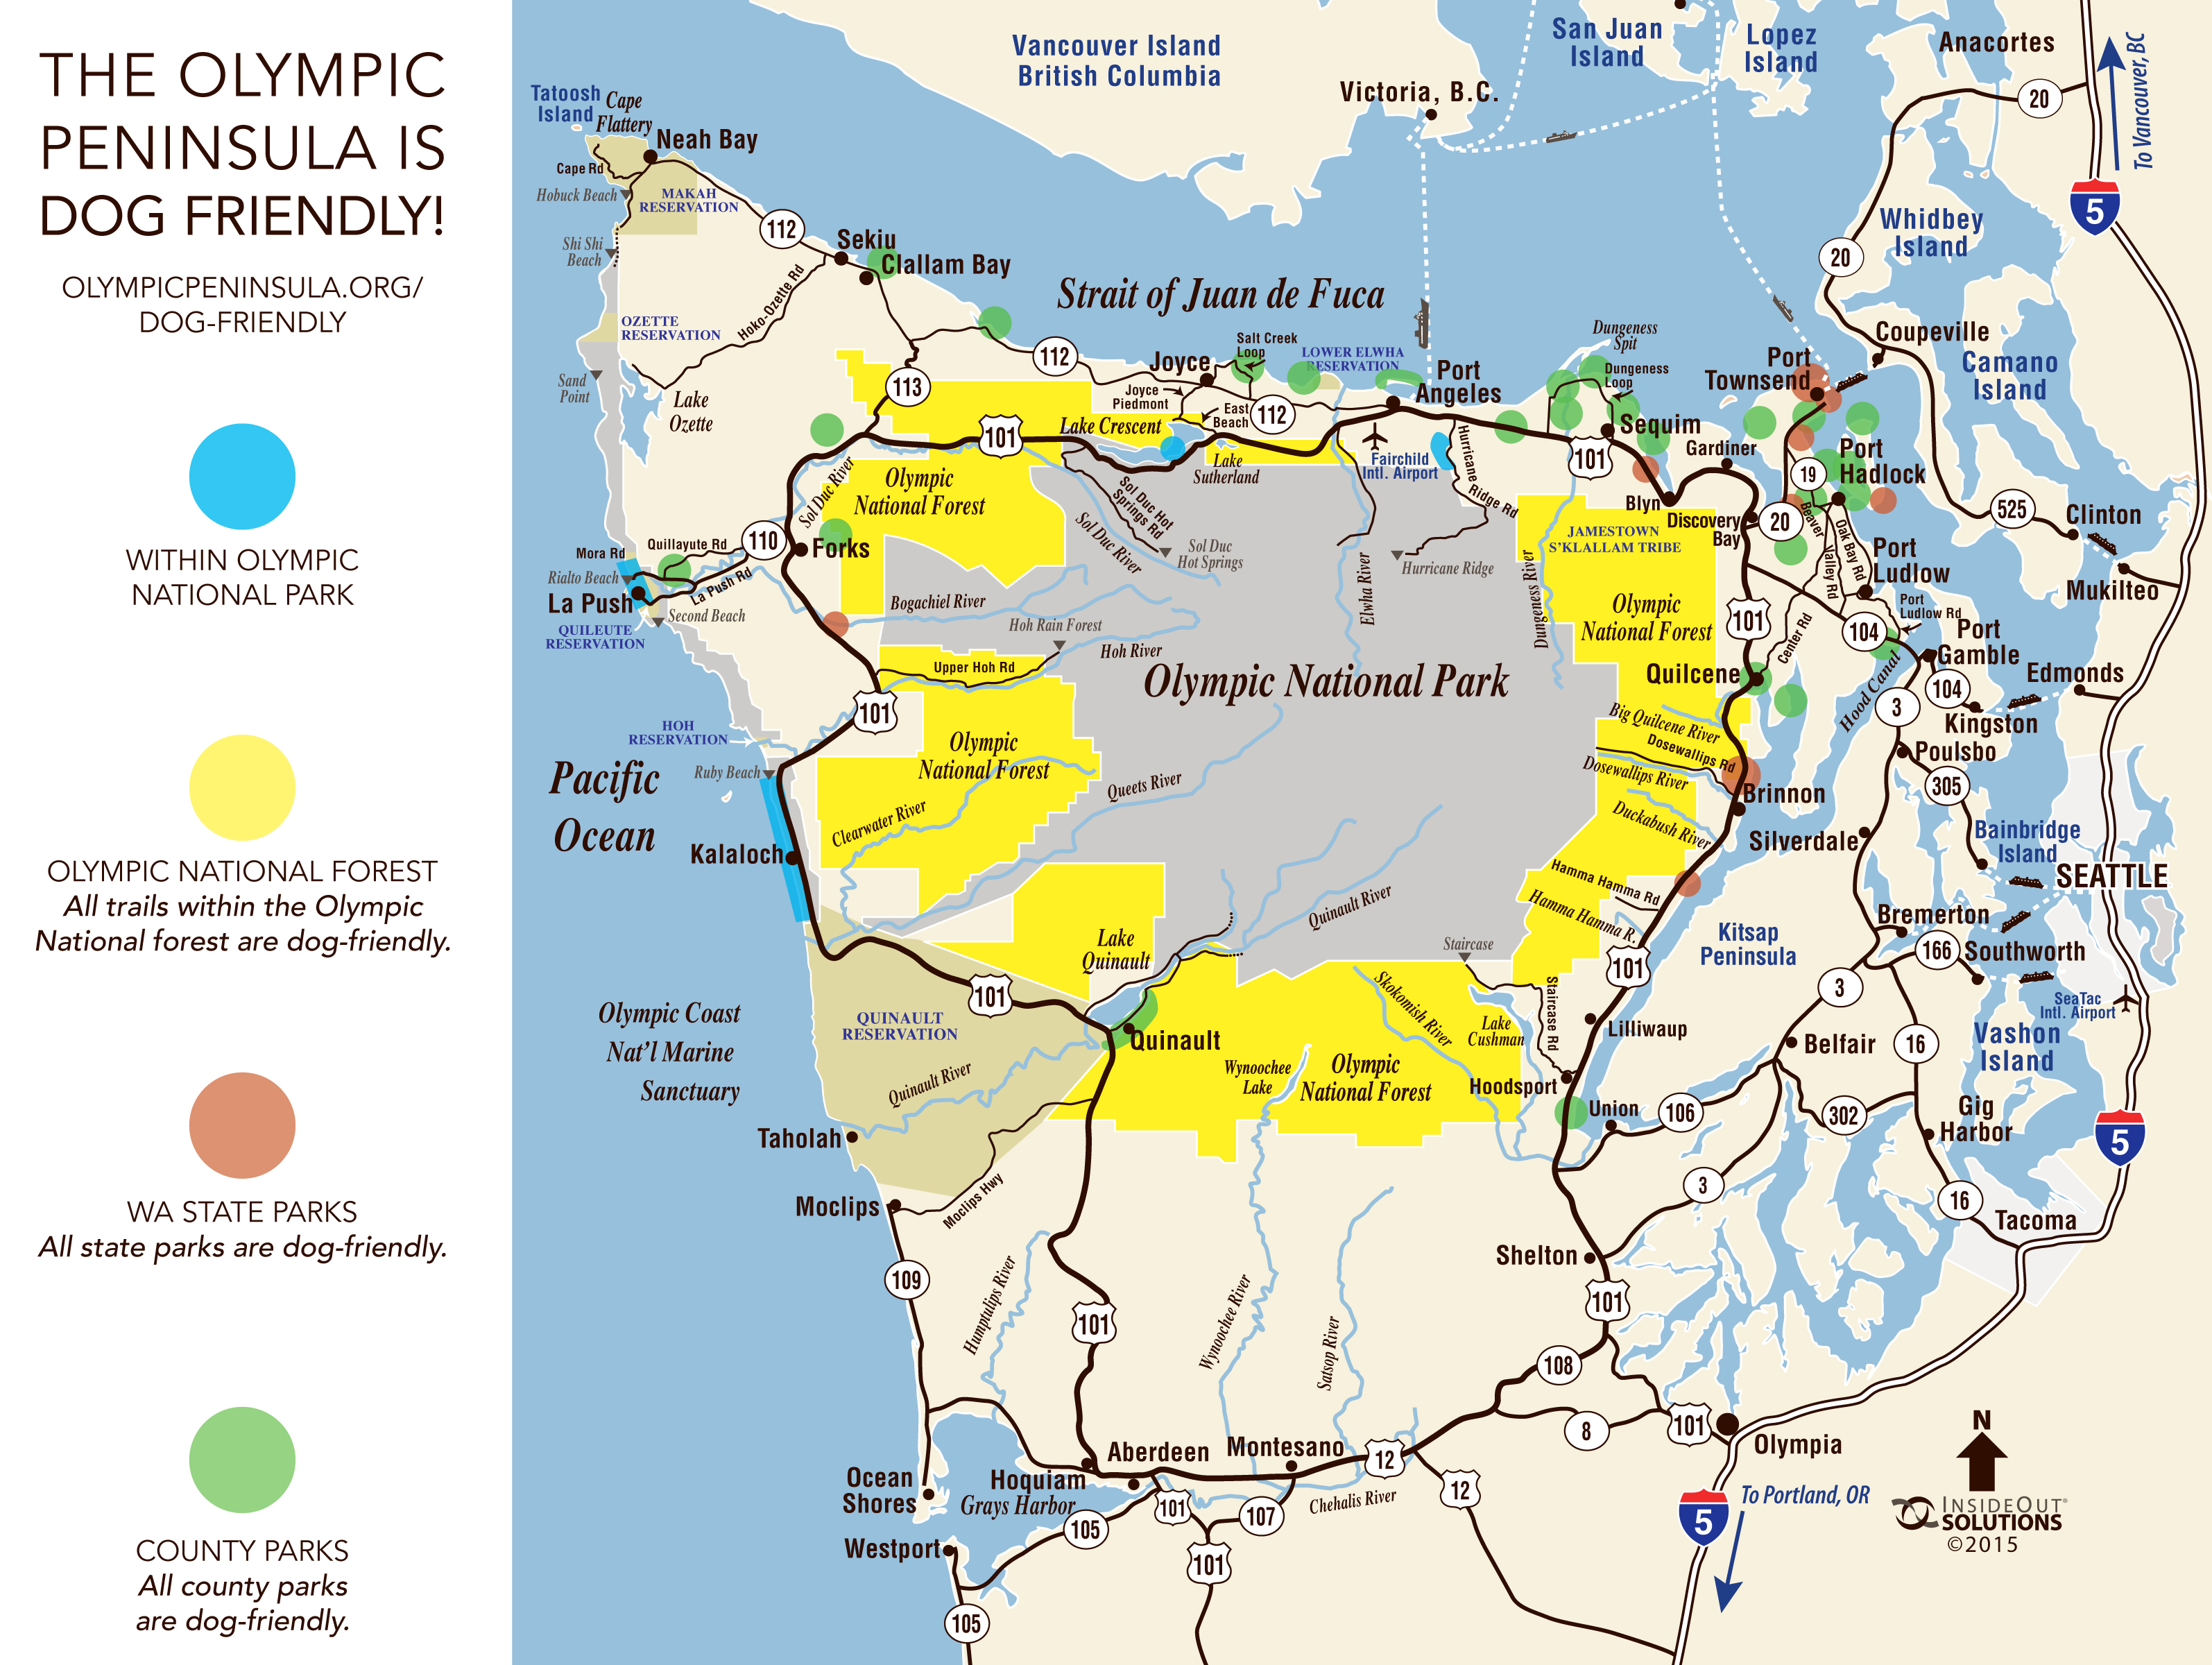 The Olympic Peninsula Visitor Bureau's new map showing outdoor areas where pets are welcome. Olympic Peninsula Visitor Bureau